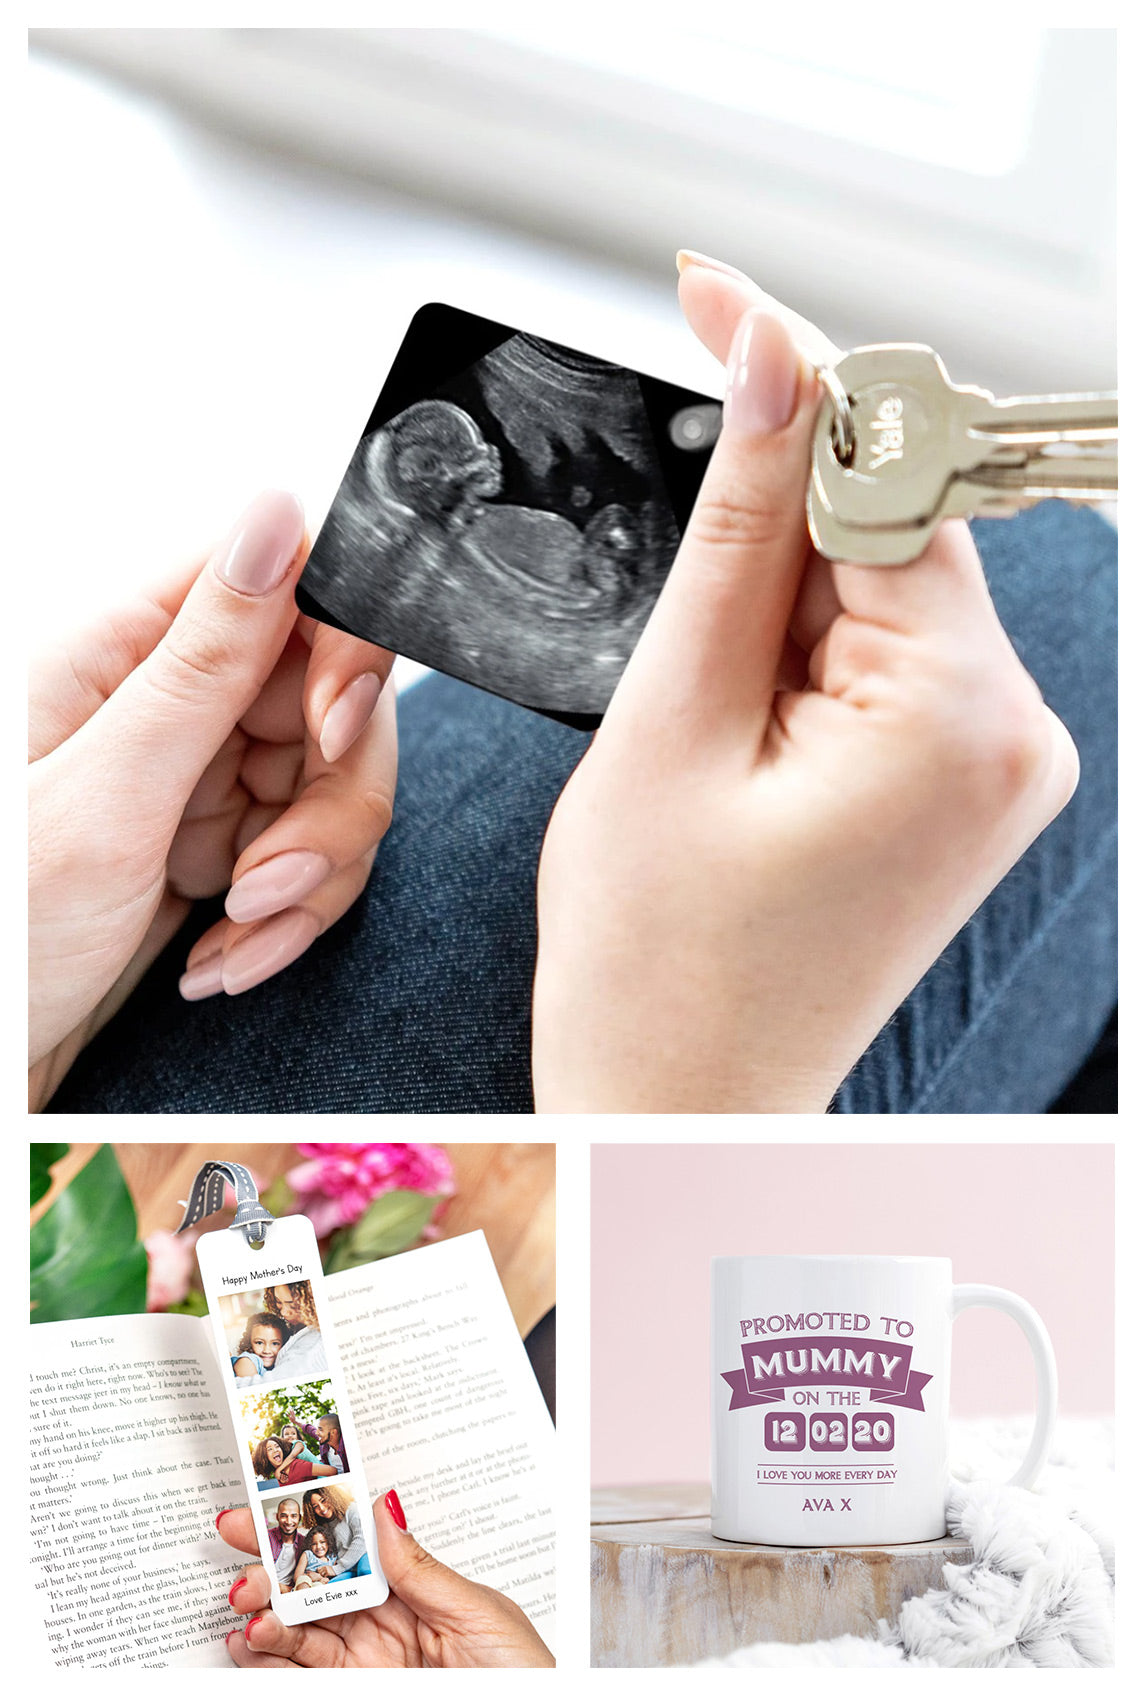 Personalised gifts for new mother's and expecting mother's